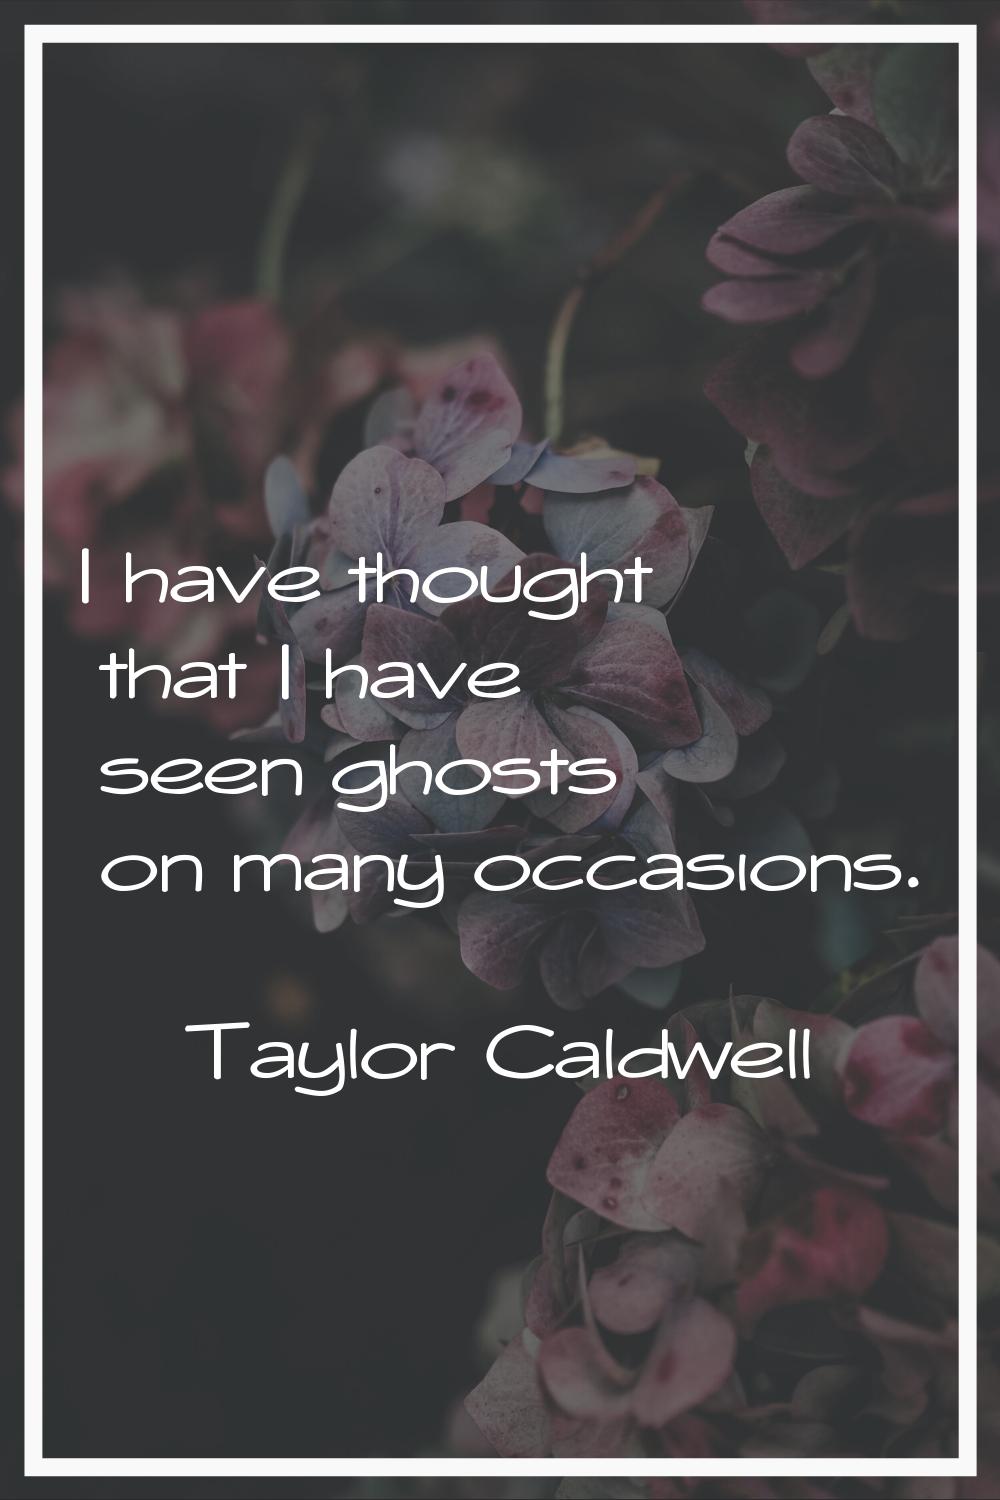 I have thought that I have seen ghosts on many occasions.